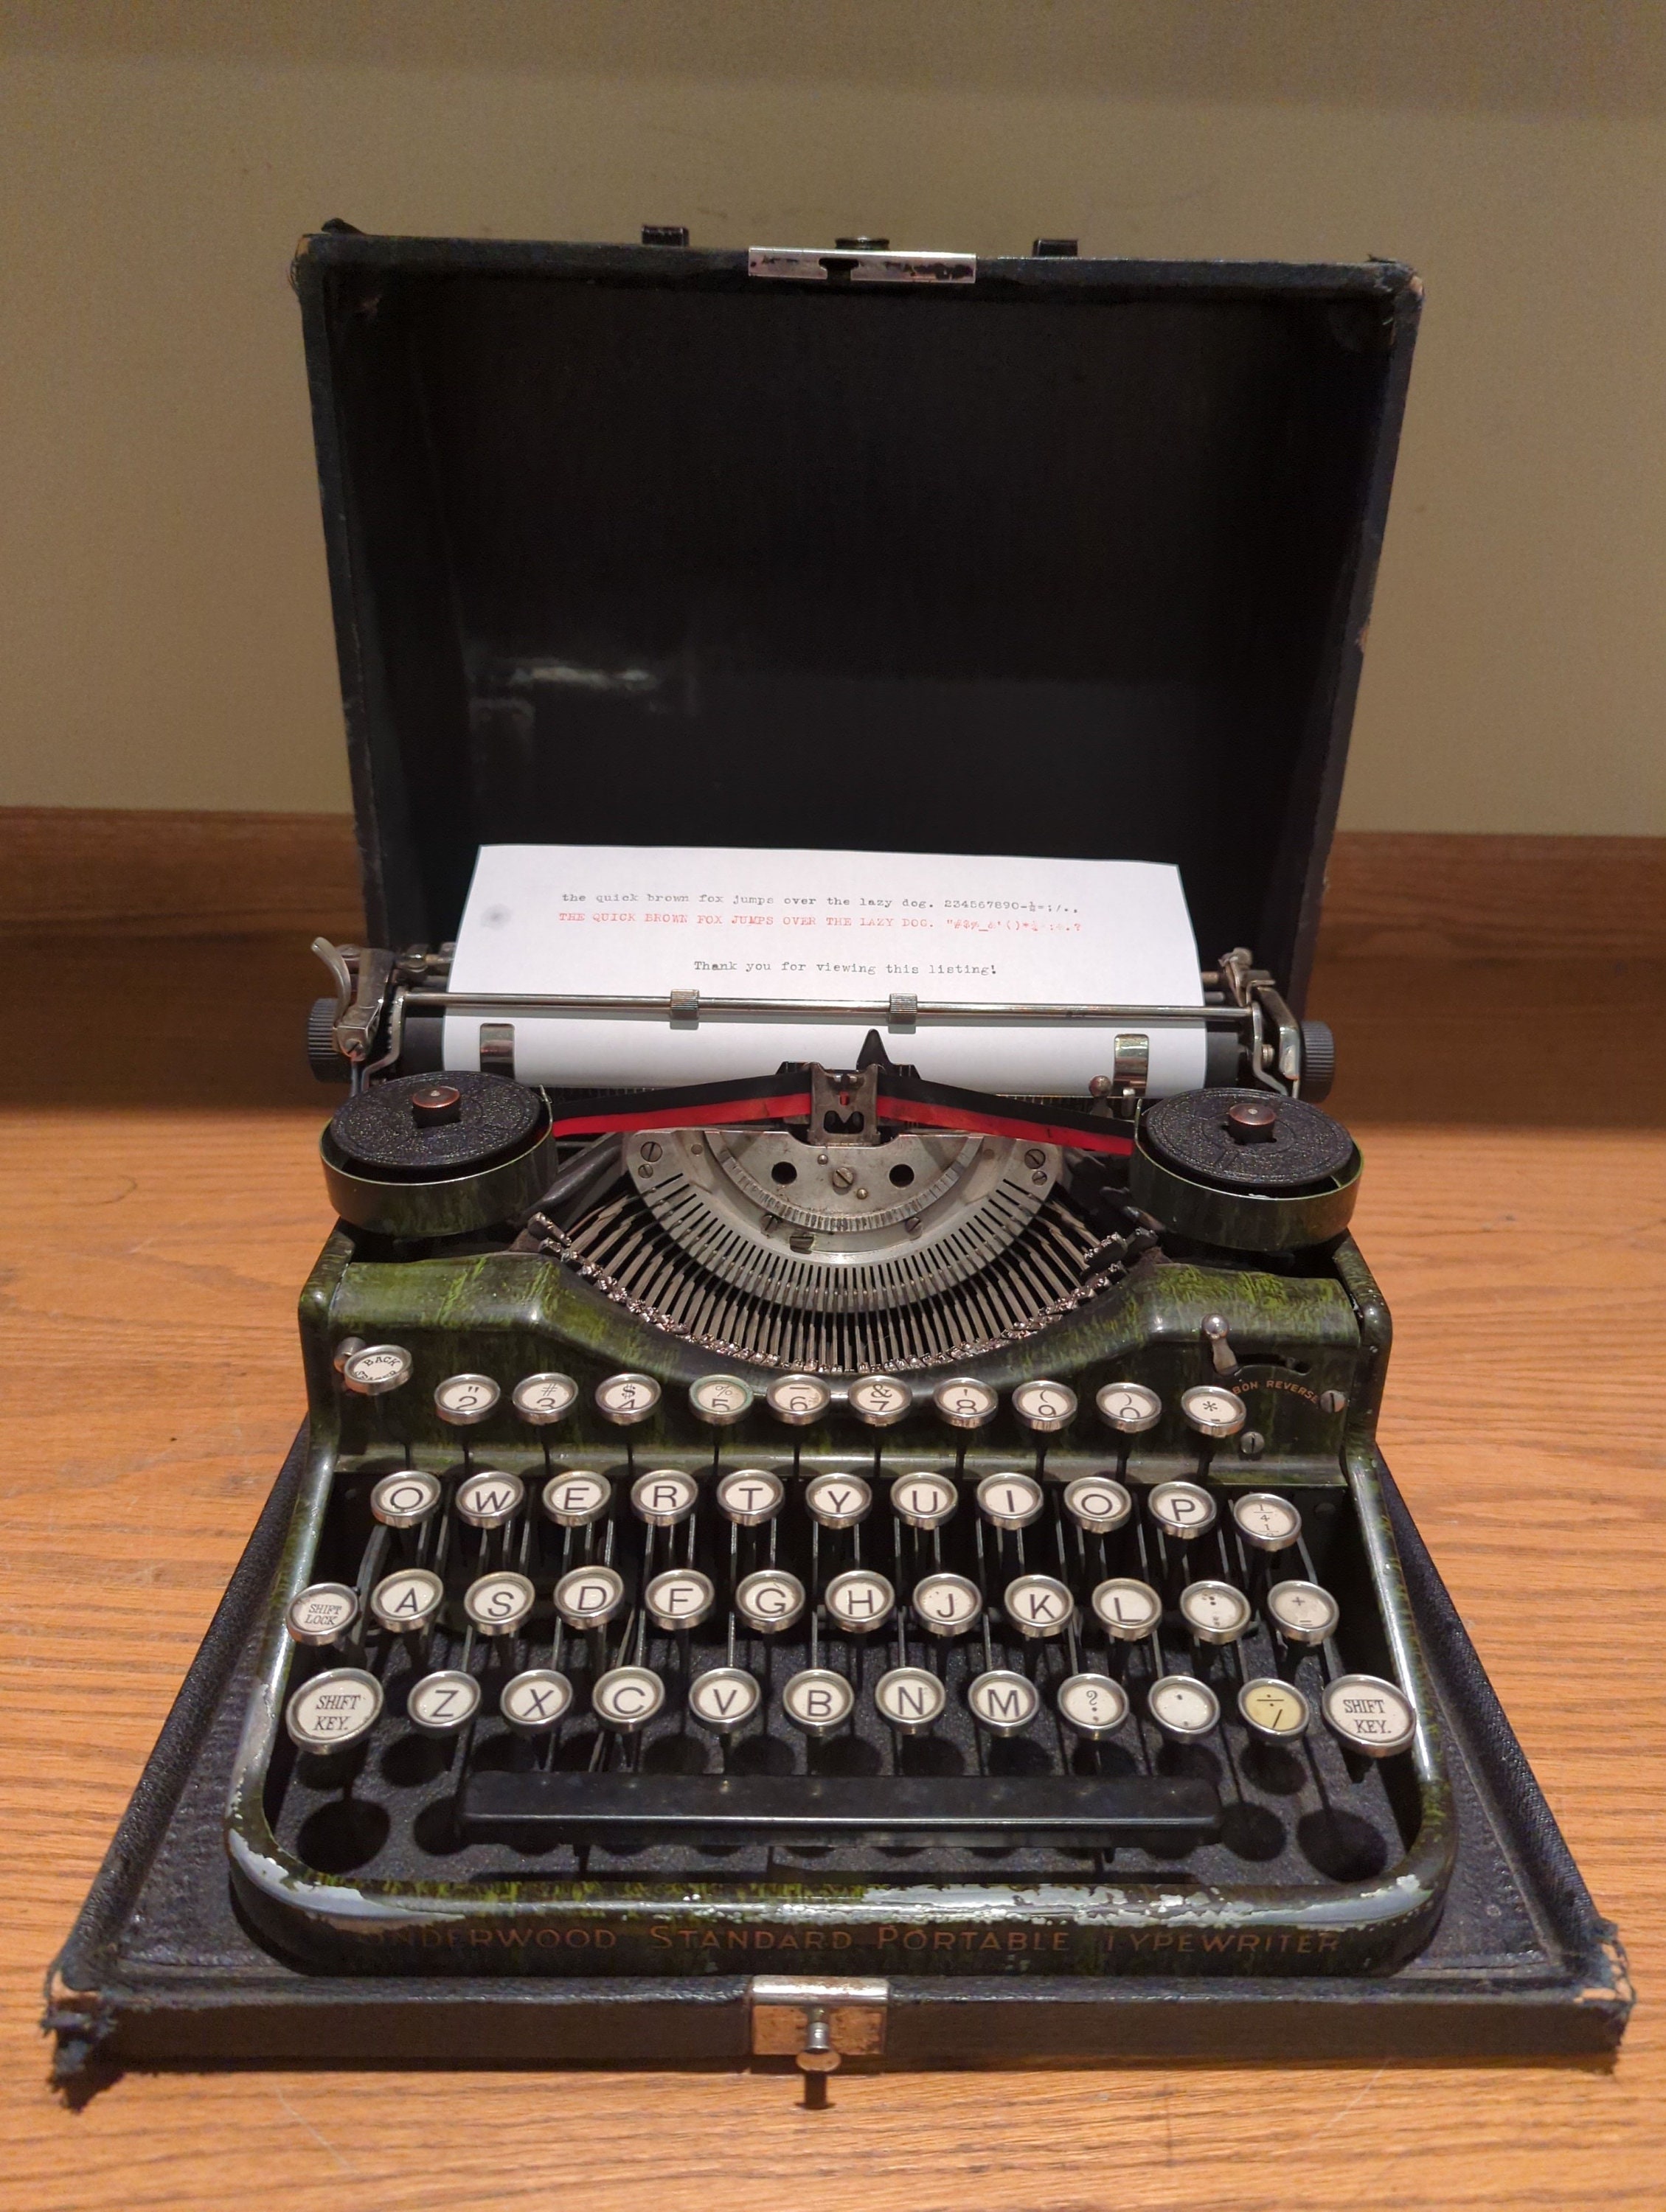 Vintage Portable Typewriter with Paper Stock Photo - Image of